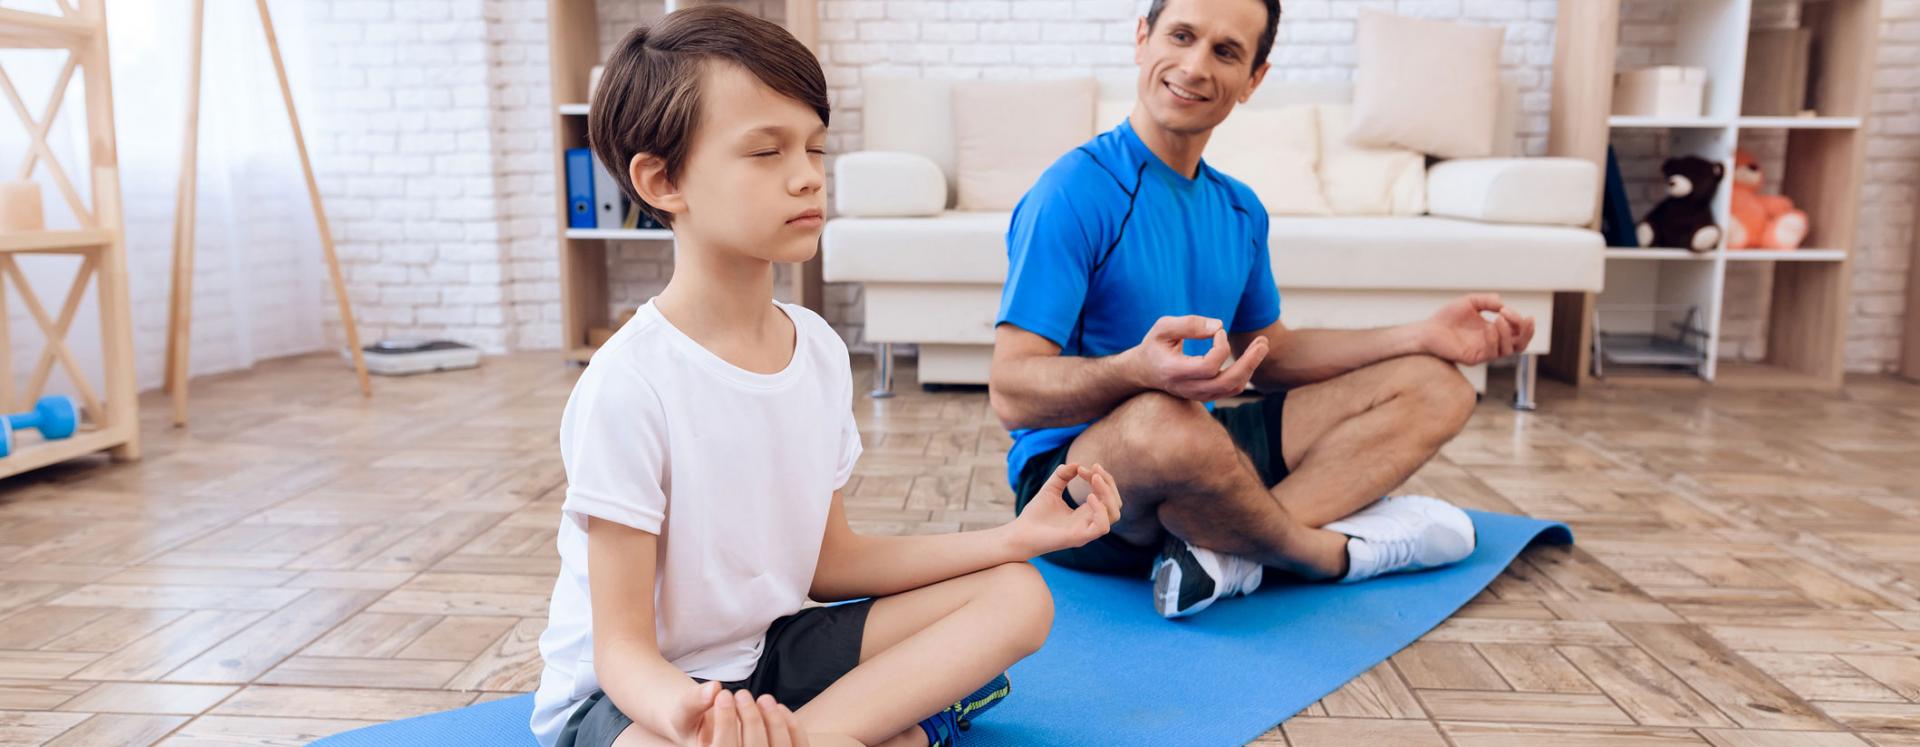 Father And Son Performing Yoga Together